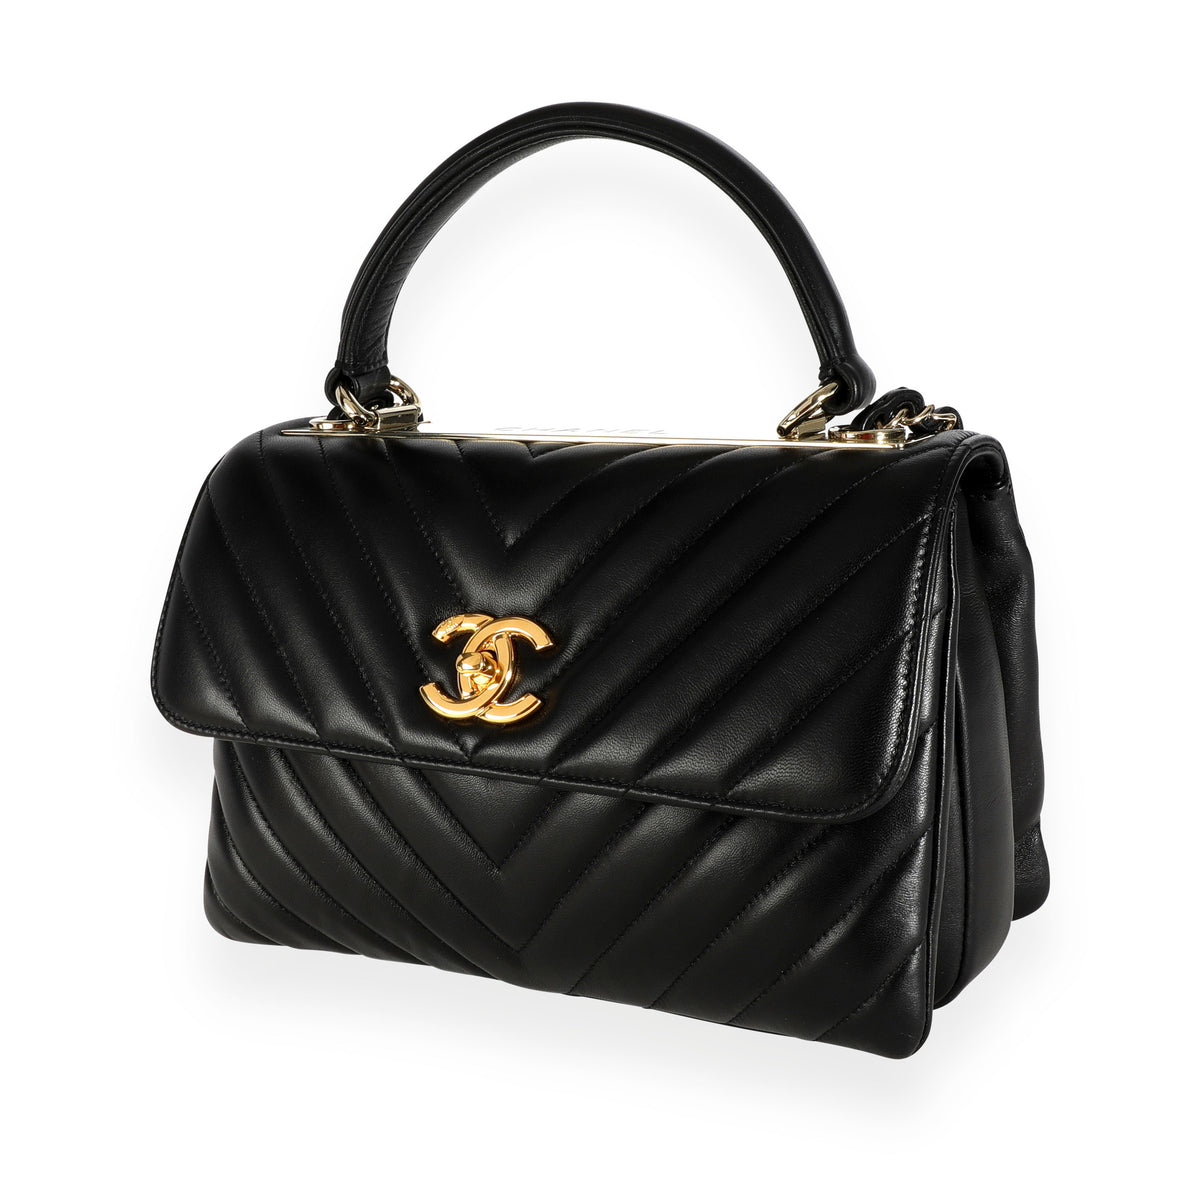 Chanel Black Lambskin Chevron Quilted Trendy CC Top Handle Flap Bag